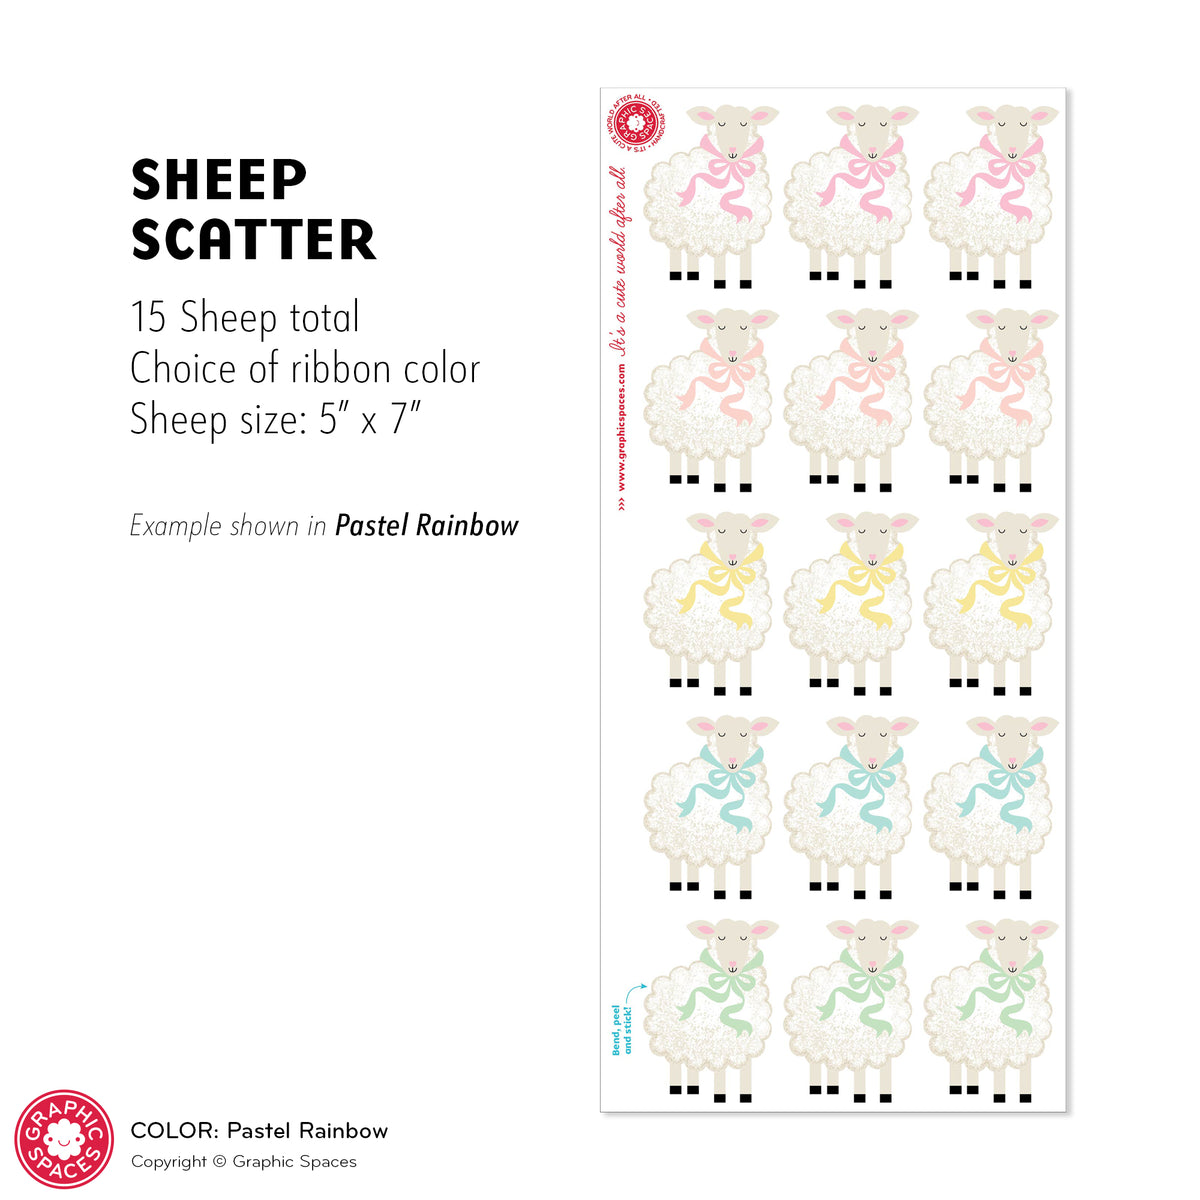 Sheep Scatter Fabric Wall Decals, Pack of 15 - PASTEL RAINBOW